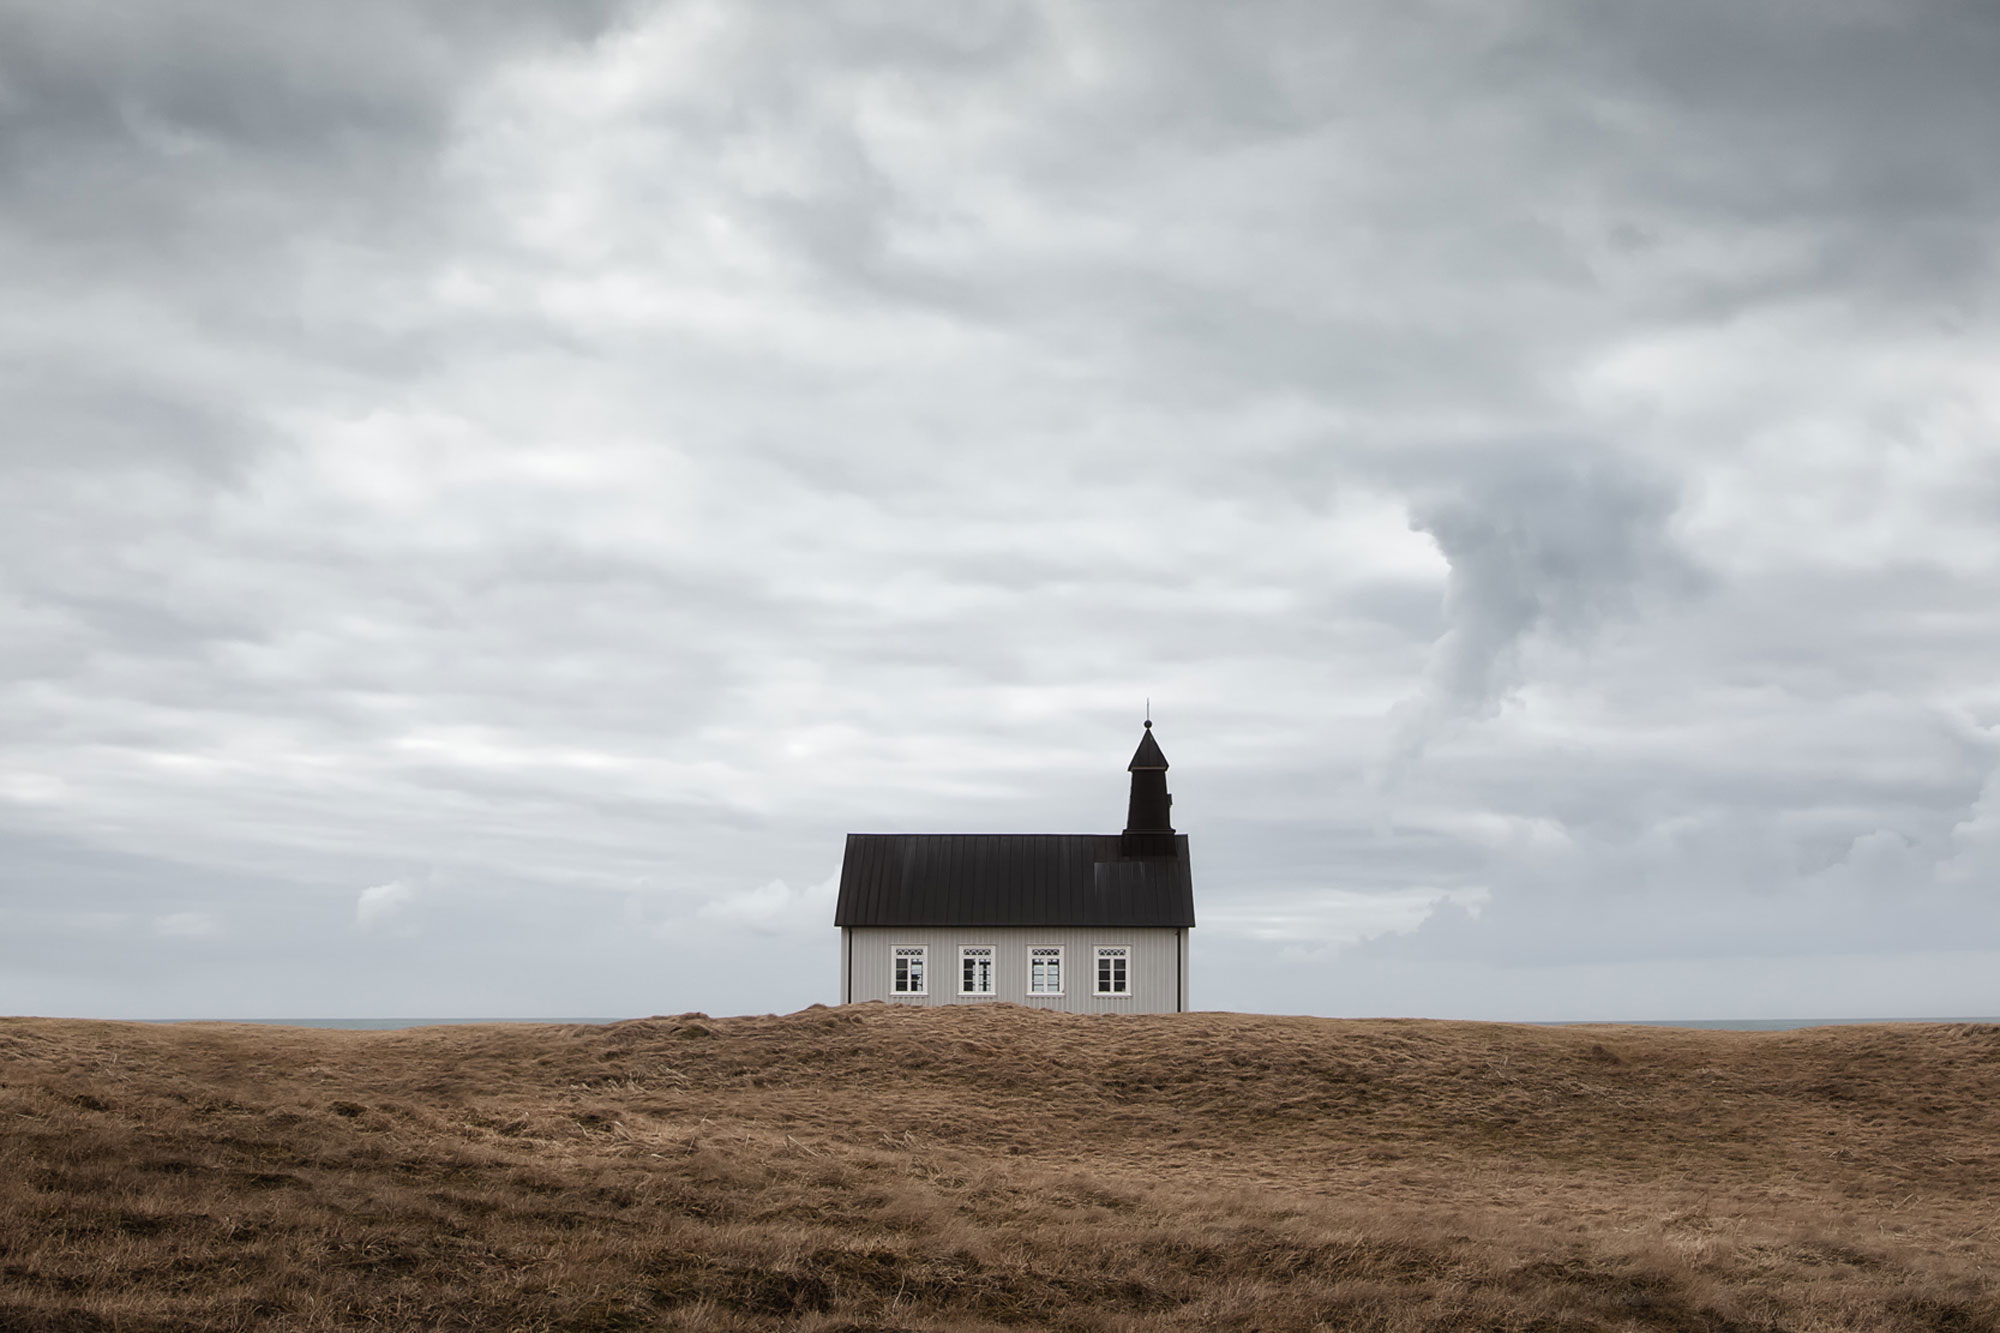 Landscape Photography Tips For Minimalist Photos